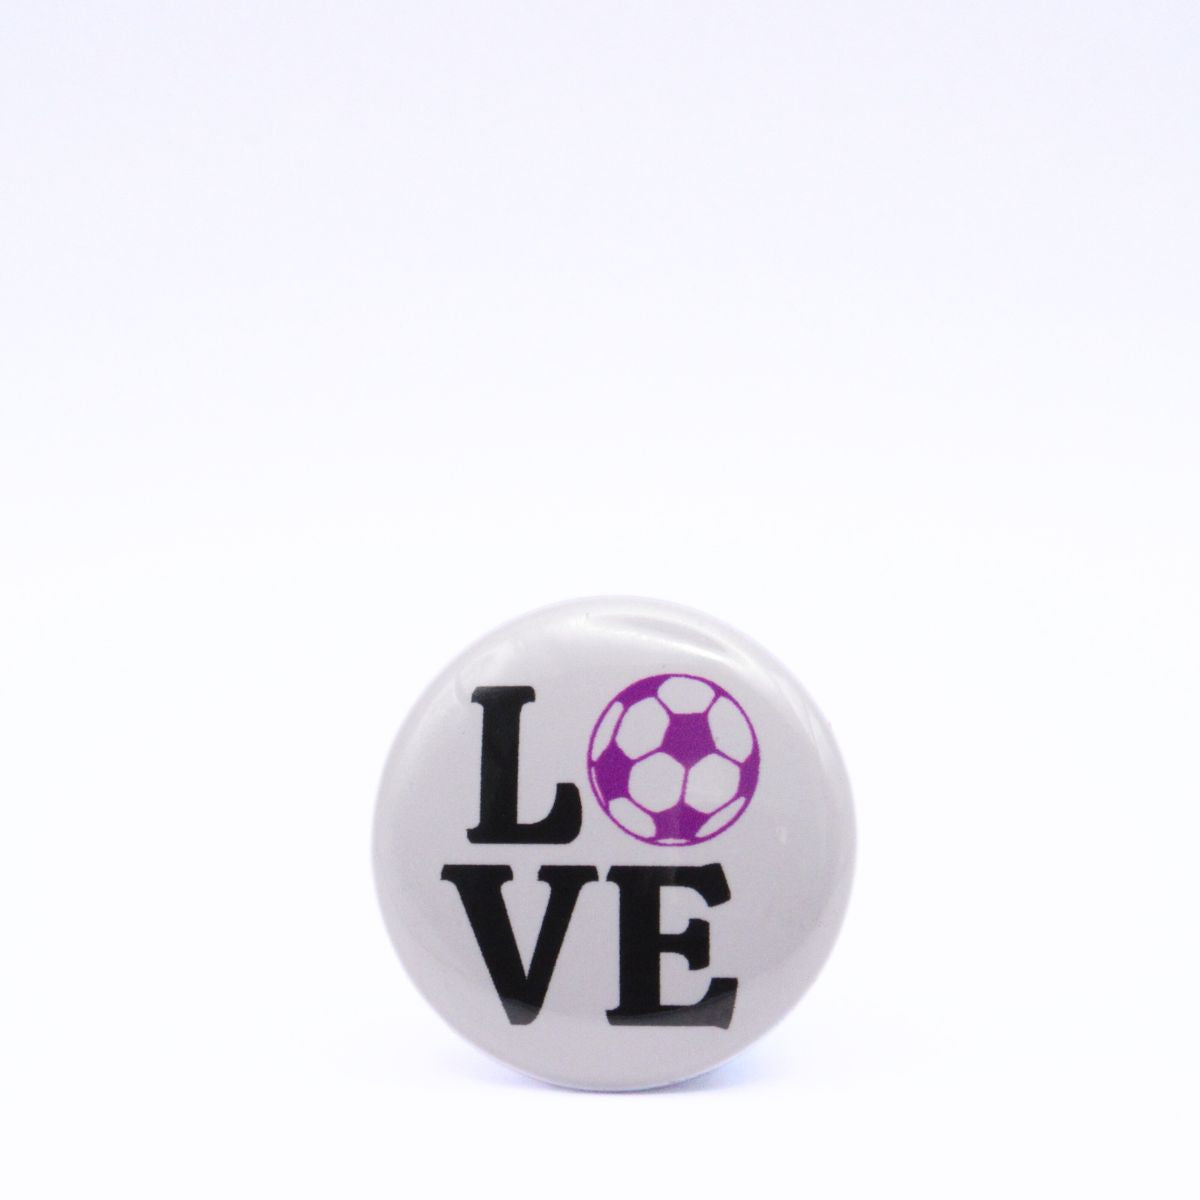 BooBooRoo Pinback Button (i.e. button, badge, pin) displaying the word "Love" with the "O" replaced by a soccer ball. Purple soccer ball with black text.